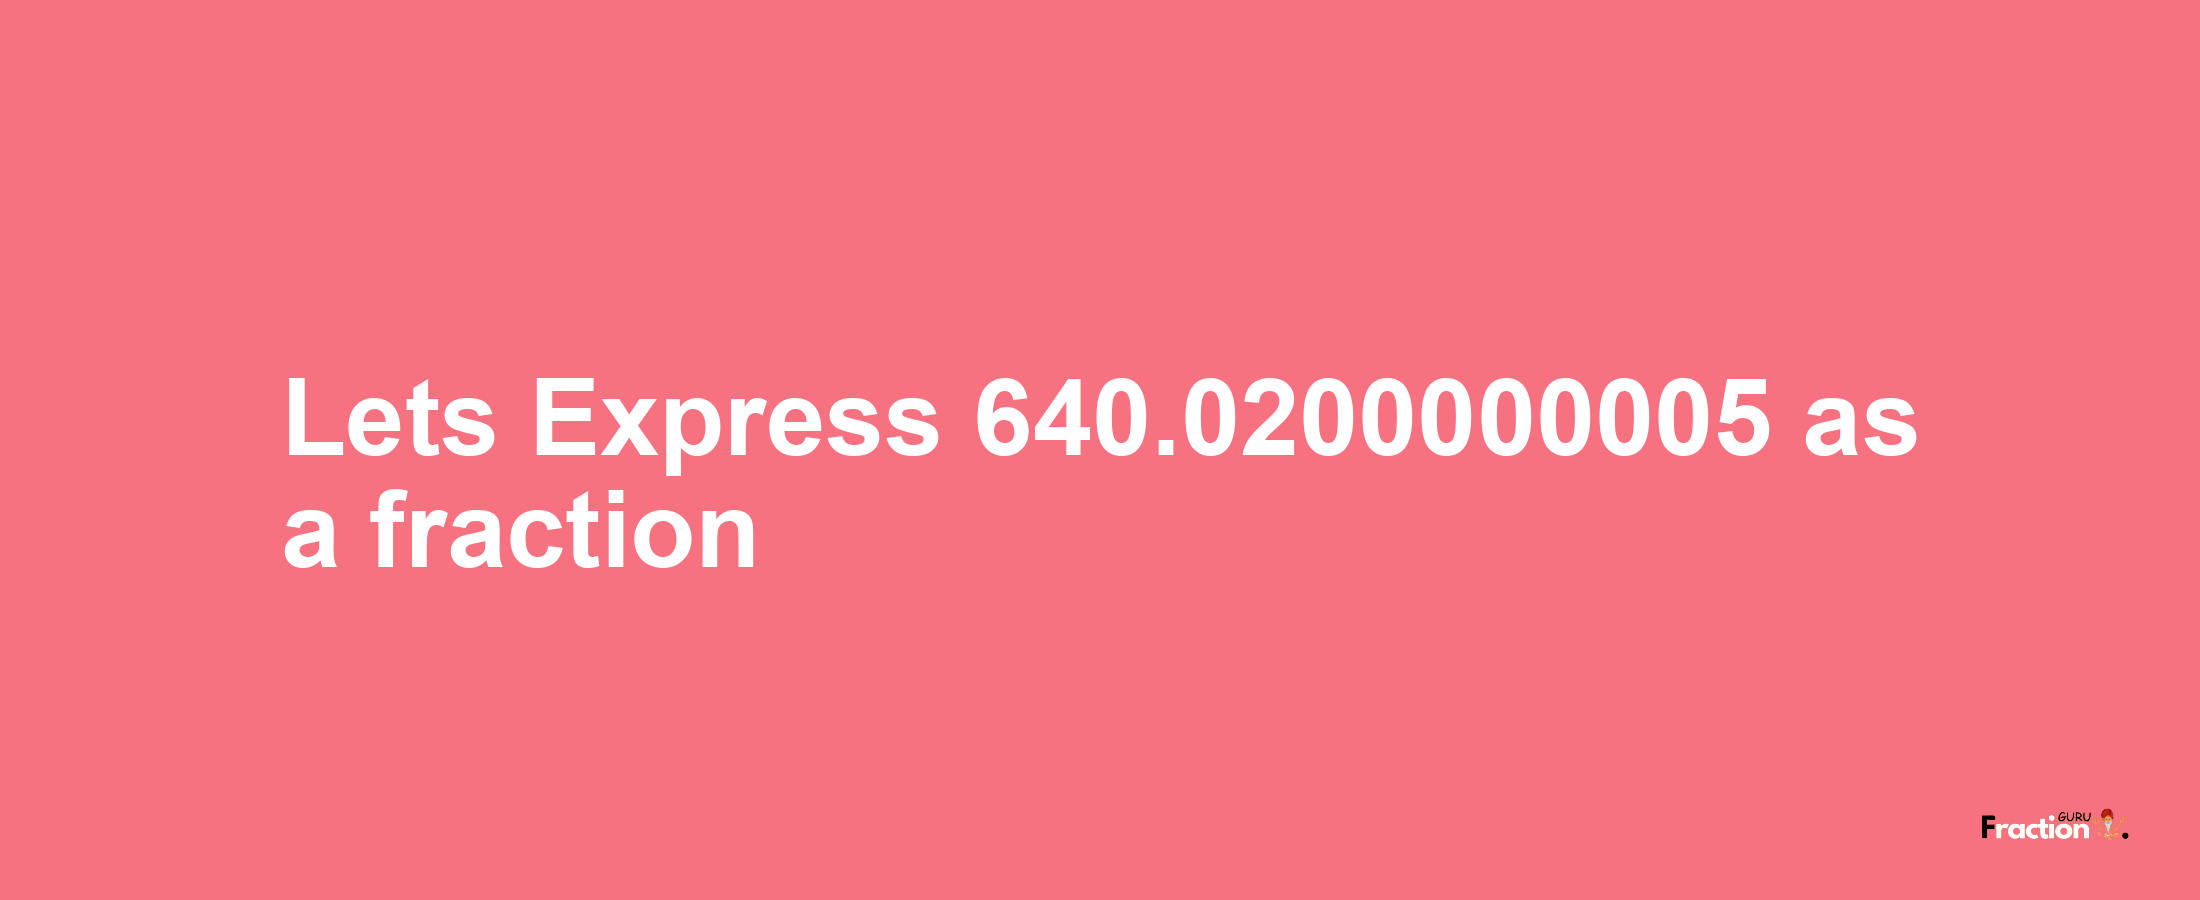 Lets Express 640.0200000005 as afraction